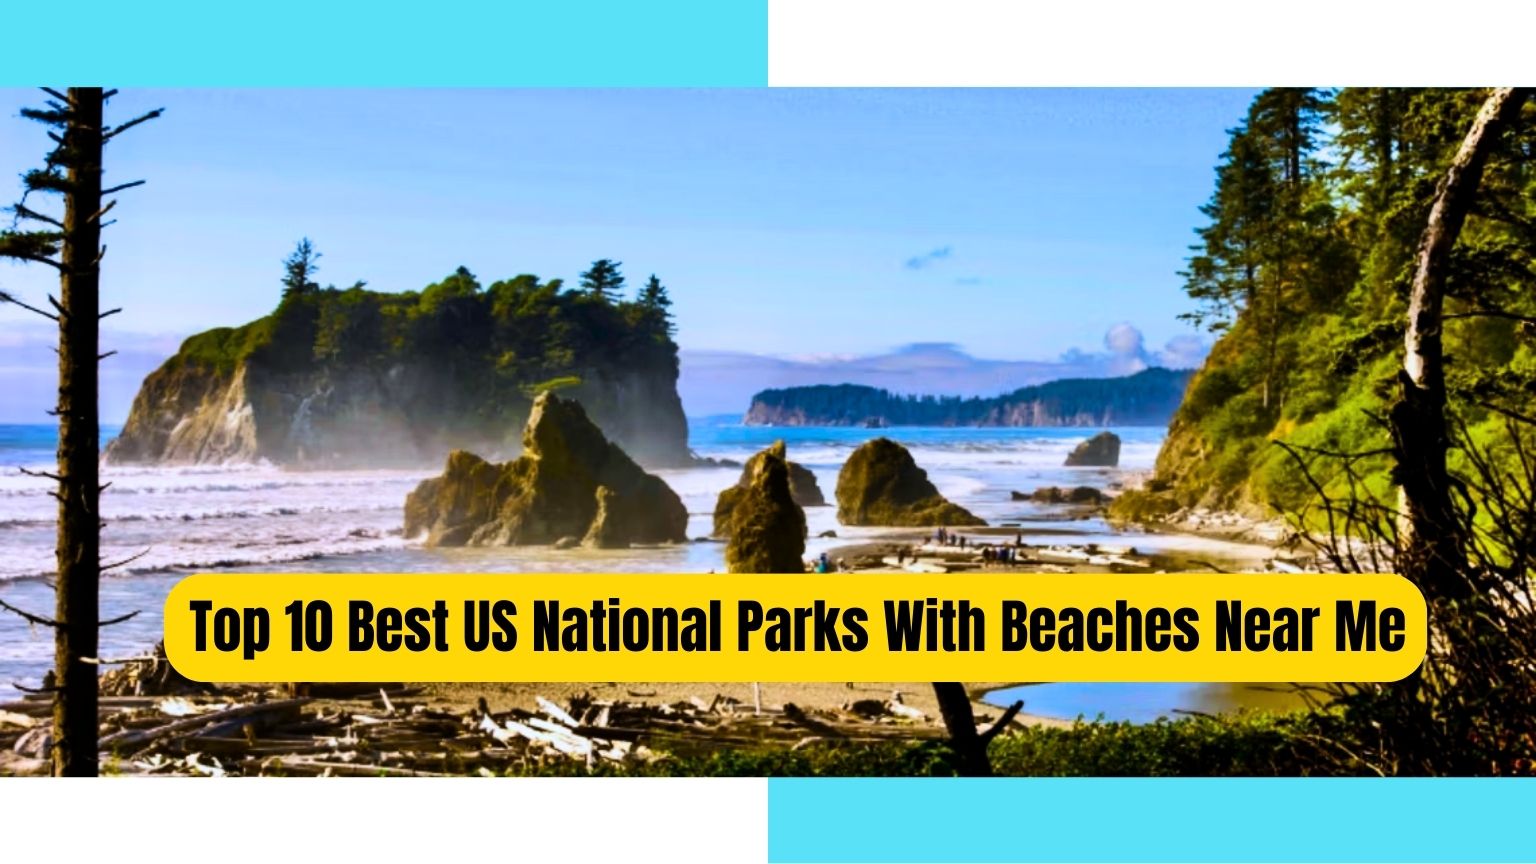 Us national parks with beaches near me, Best us national parks with beaches, Top 10 Best US National Parks With Beaches Near Me